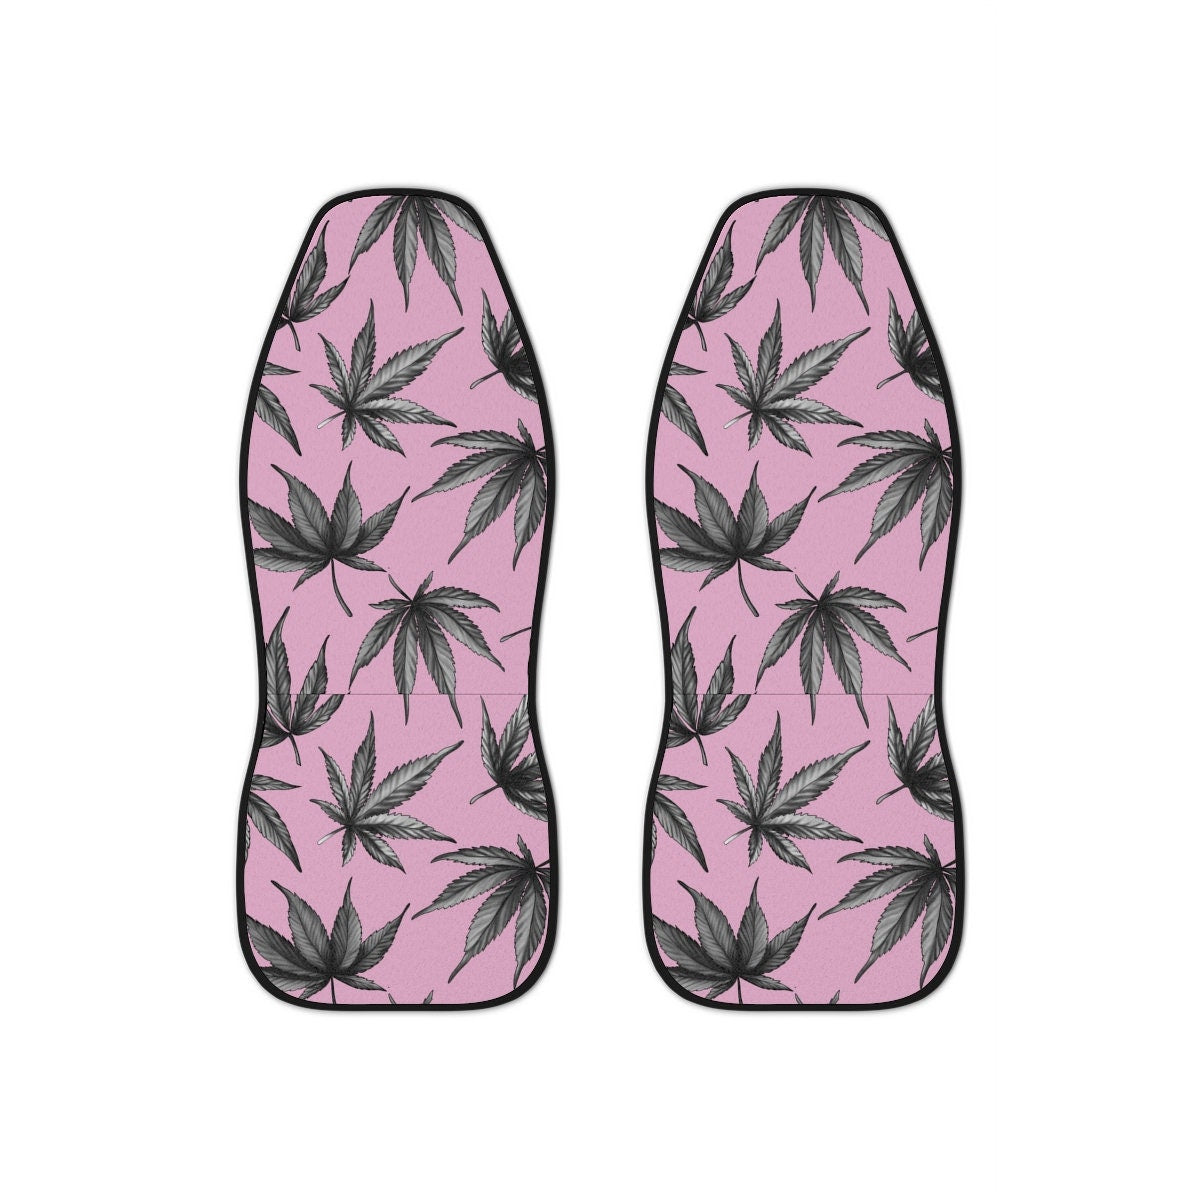 Car Seat Covers, Weed Leaf Car Accessories for Women, Pink Hippie Car –  HMDesignStudioUS